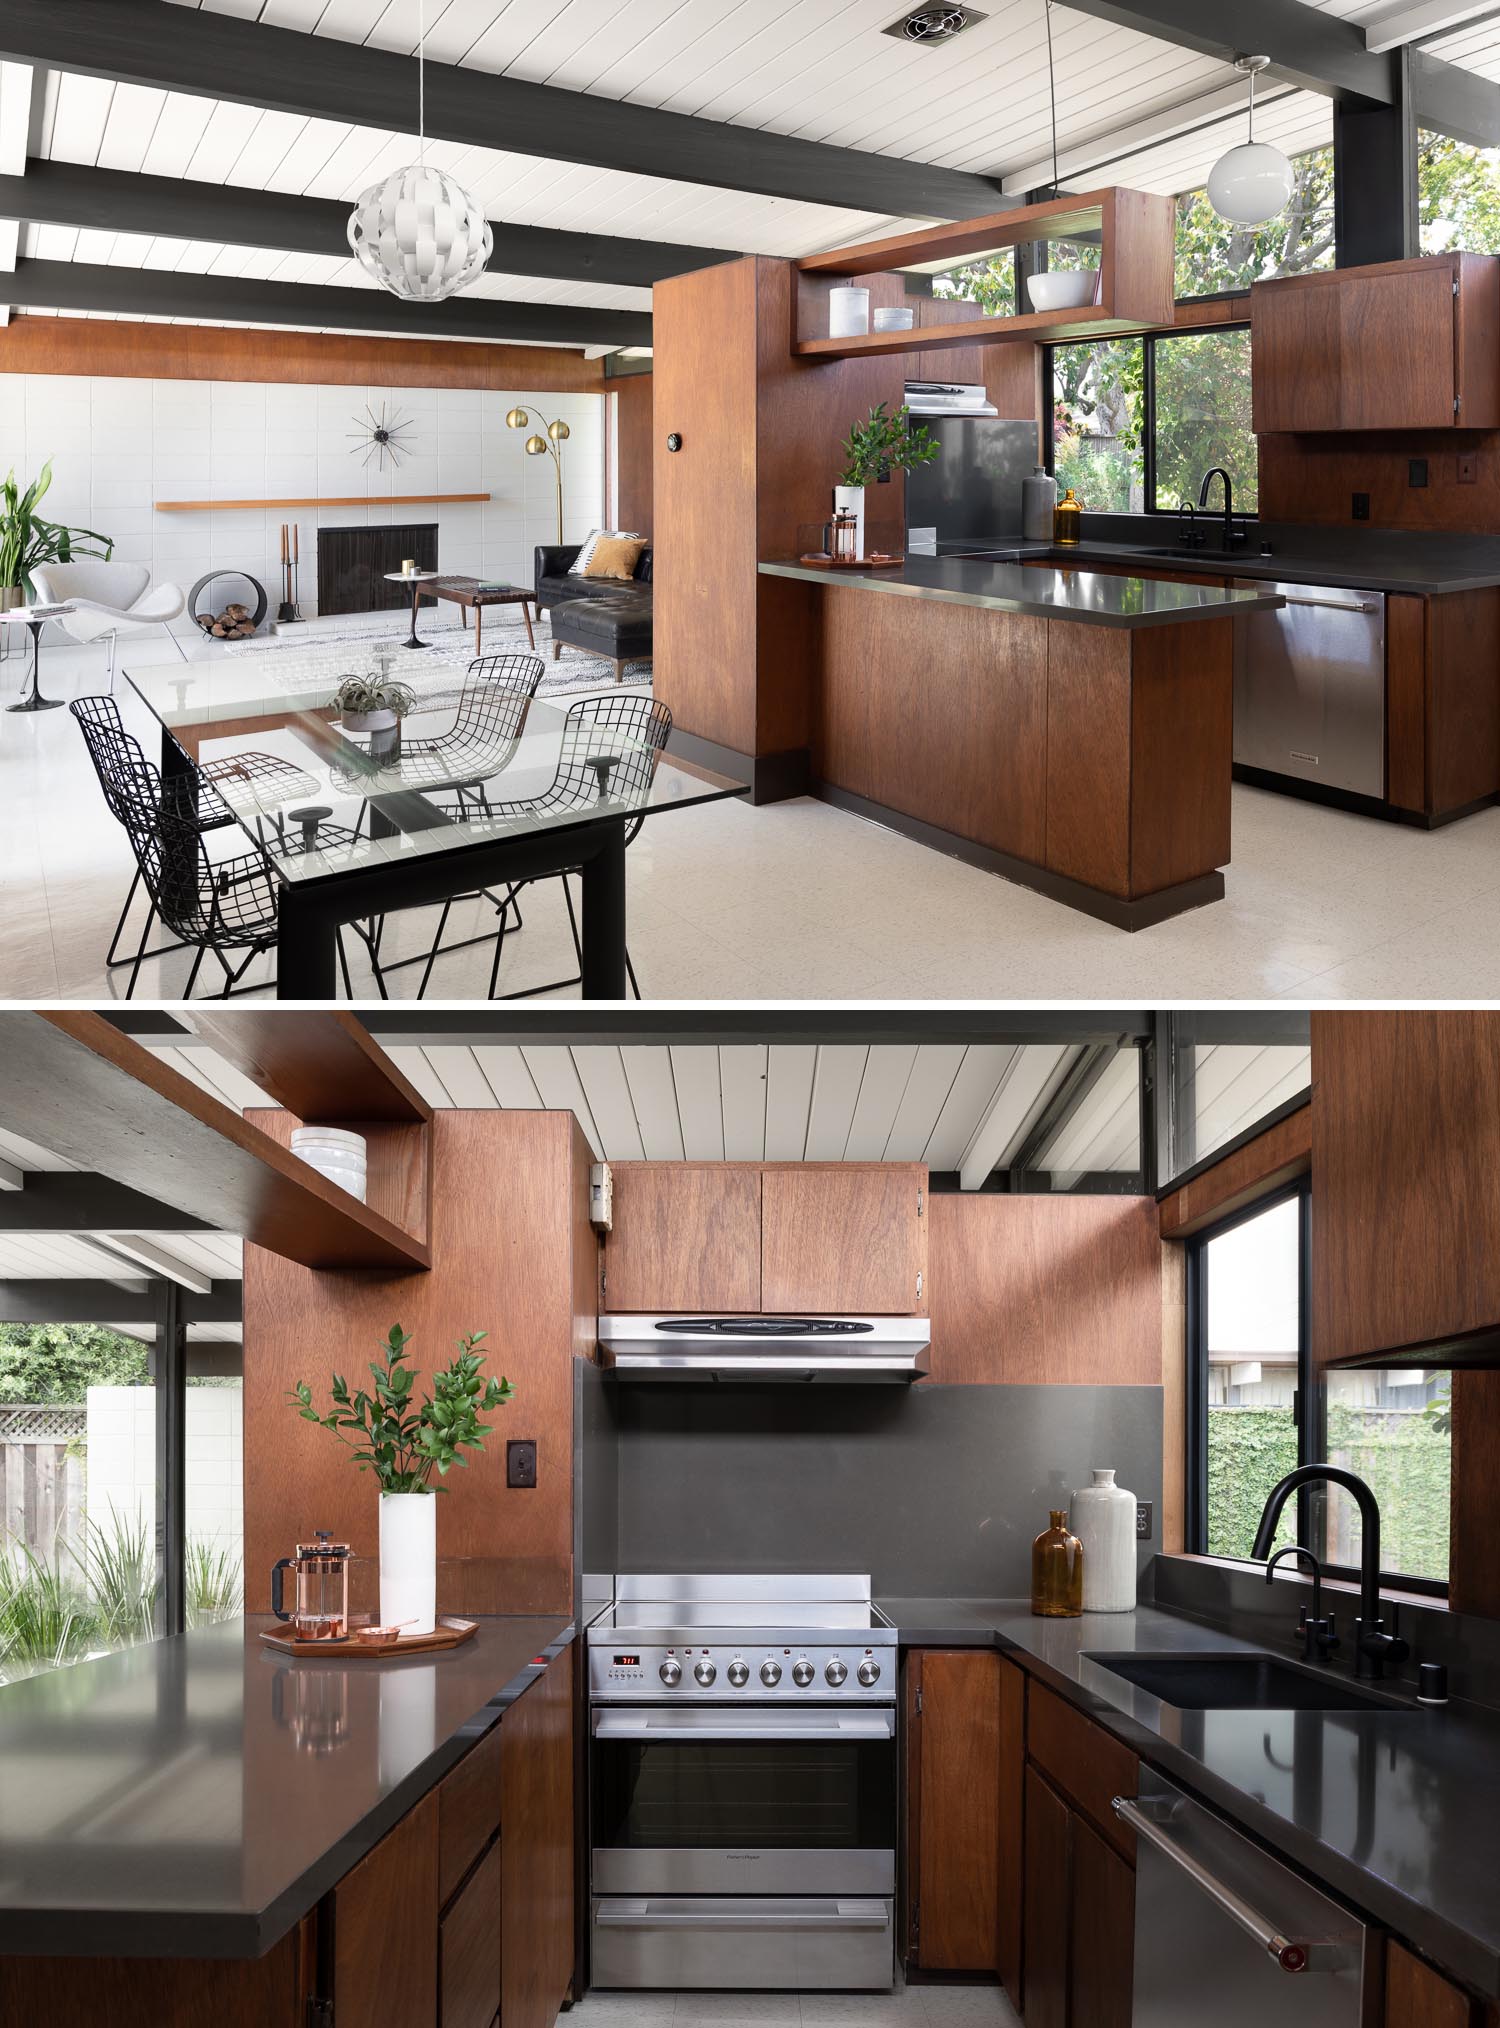 An updated Eichler home includes the kichen, where the wood was restored and a simple dark grey countertop installed with black fixtures that make the wood pop.